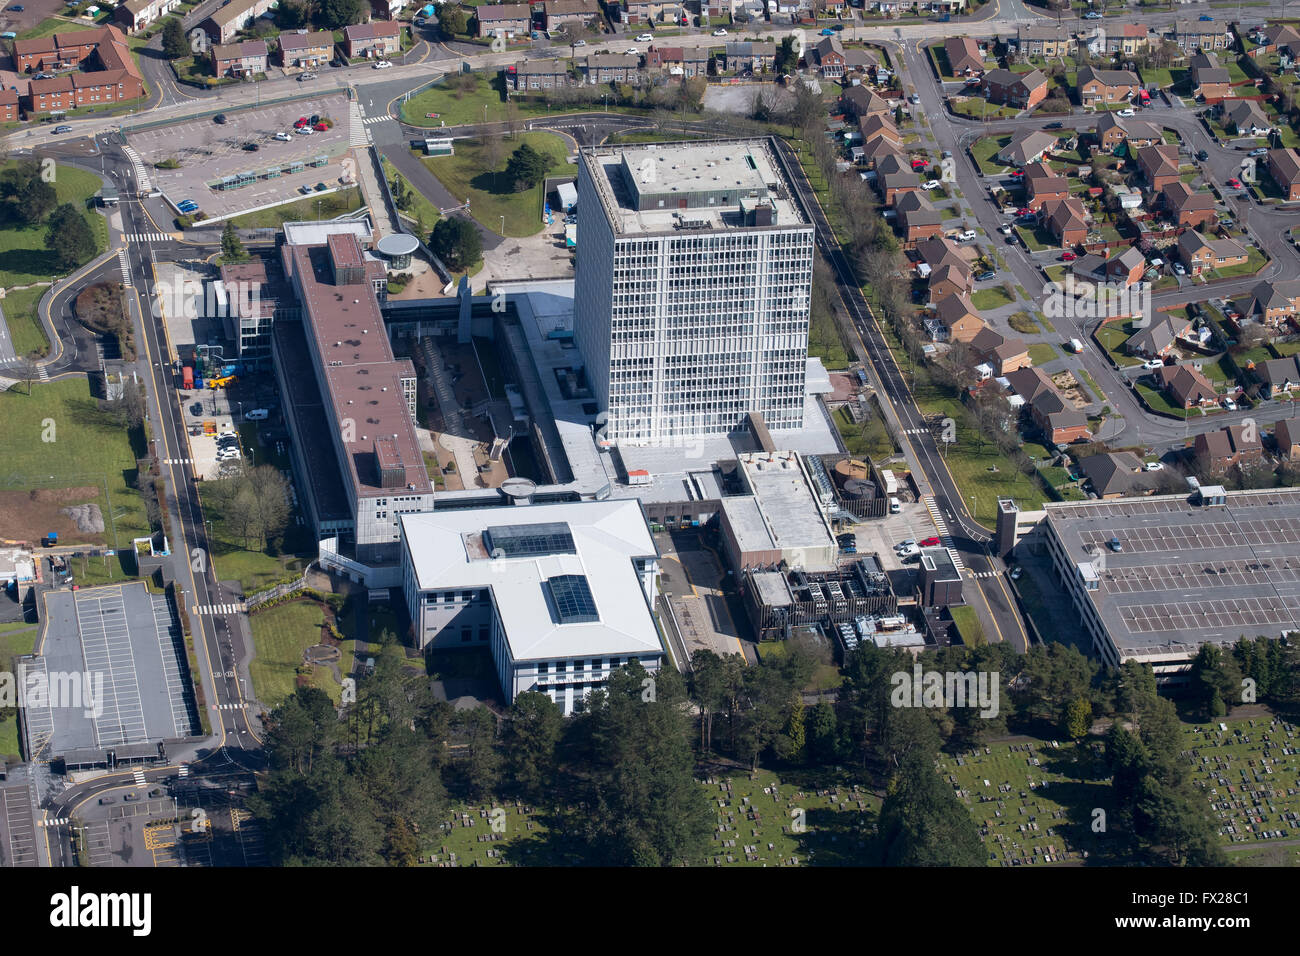 Aerial view of the DVLA (Driver and Vehicle Licensing Agency) building in Swansea, south Wales. Stock Photo